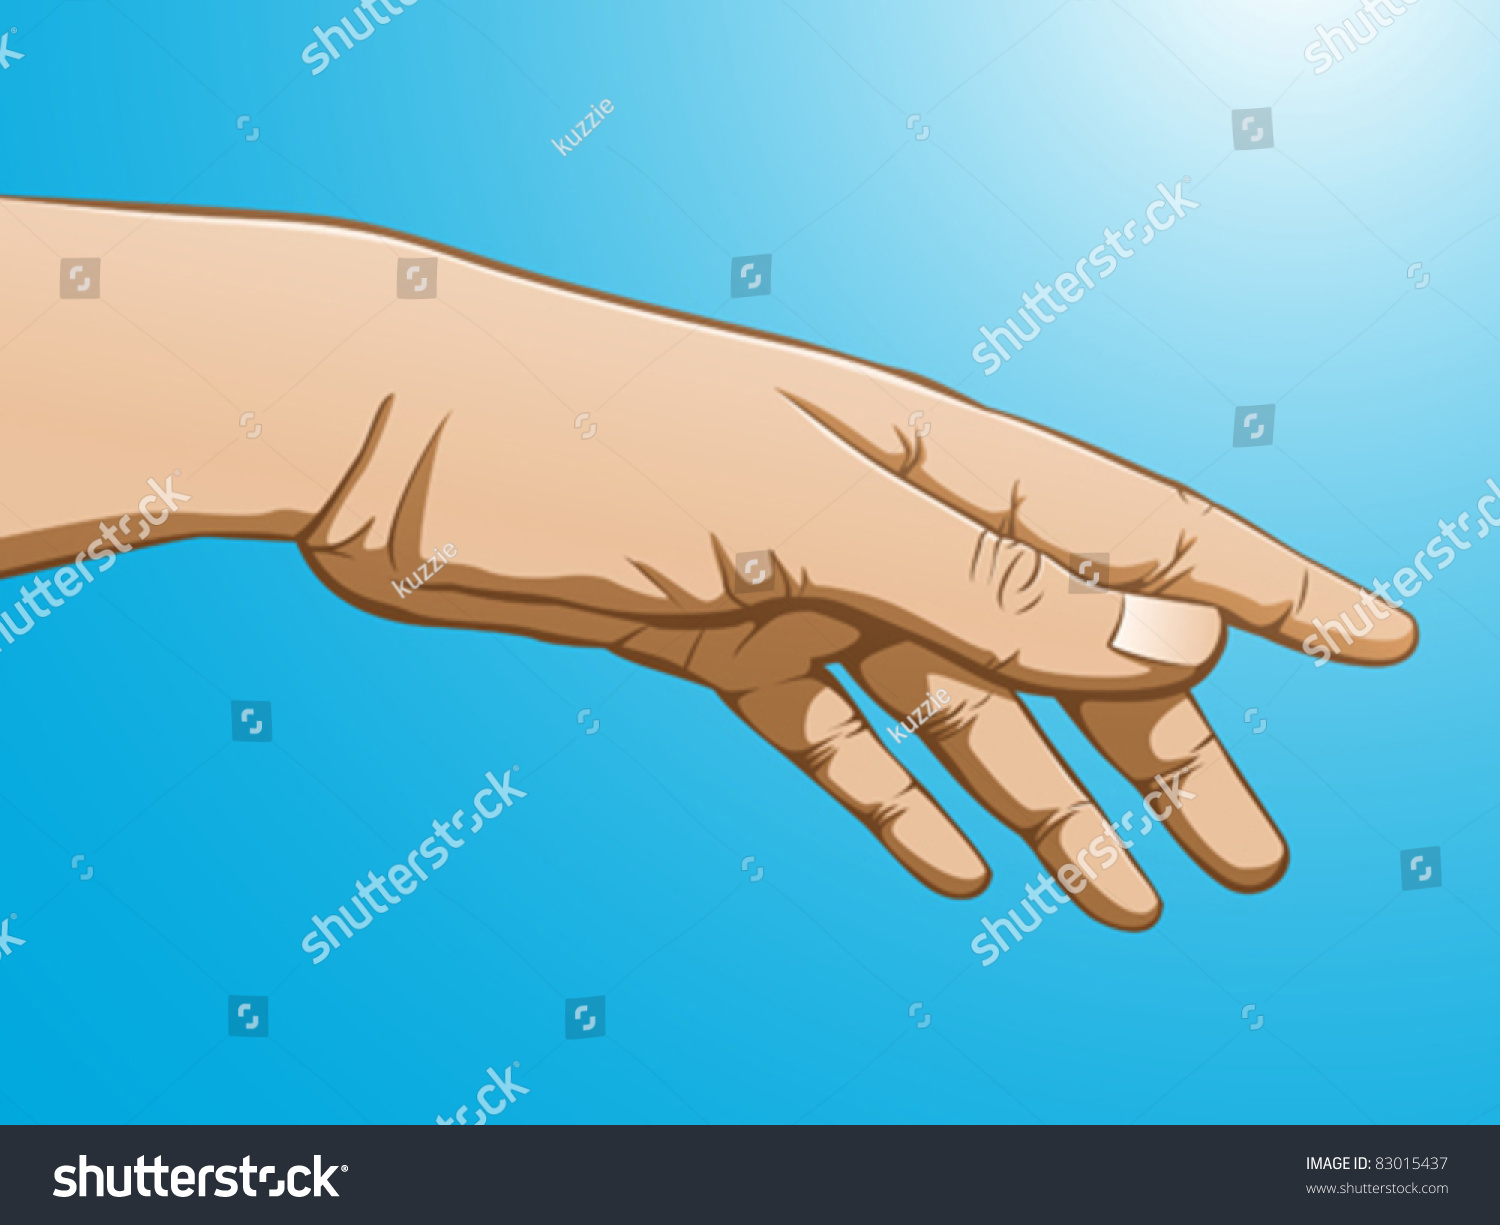 Full color illustration of a hand reaching #83015437